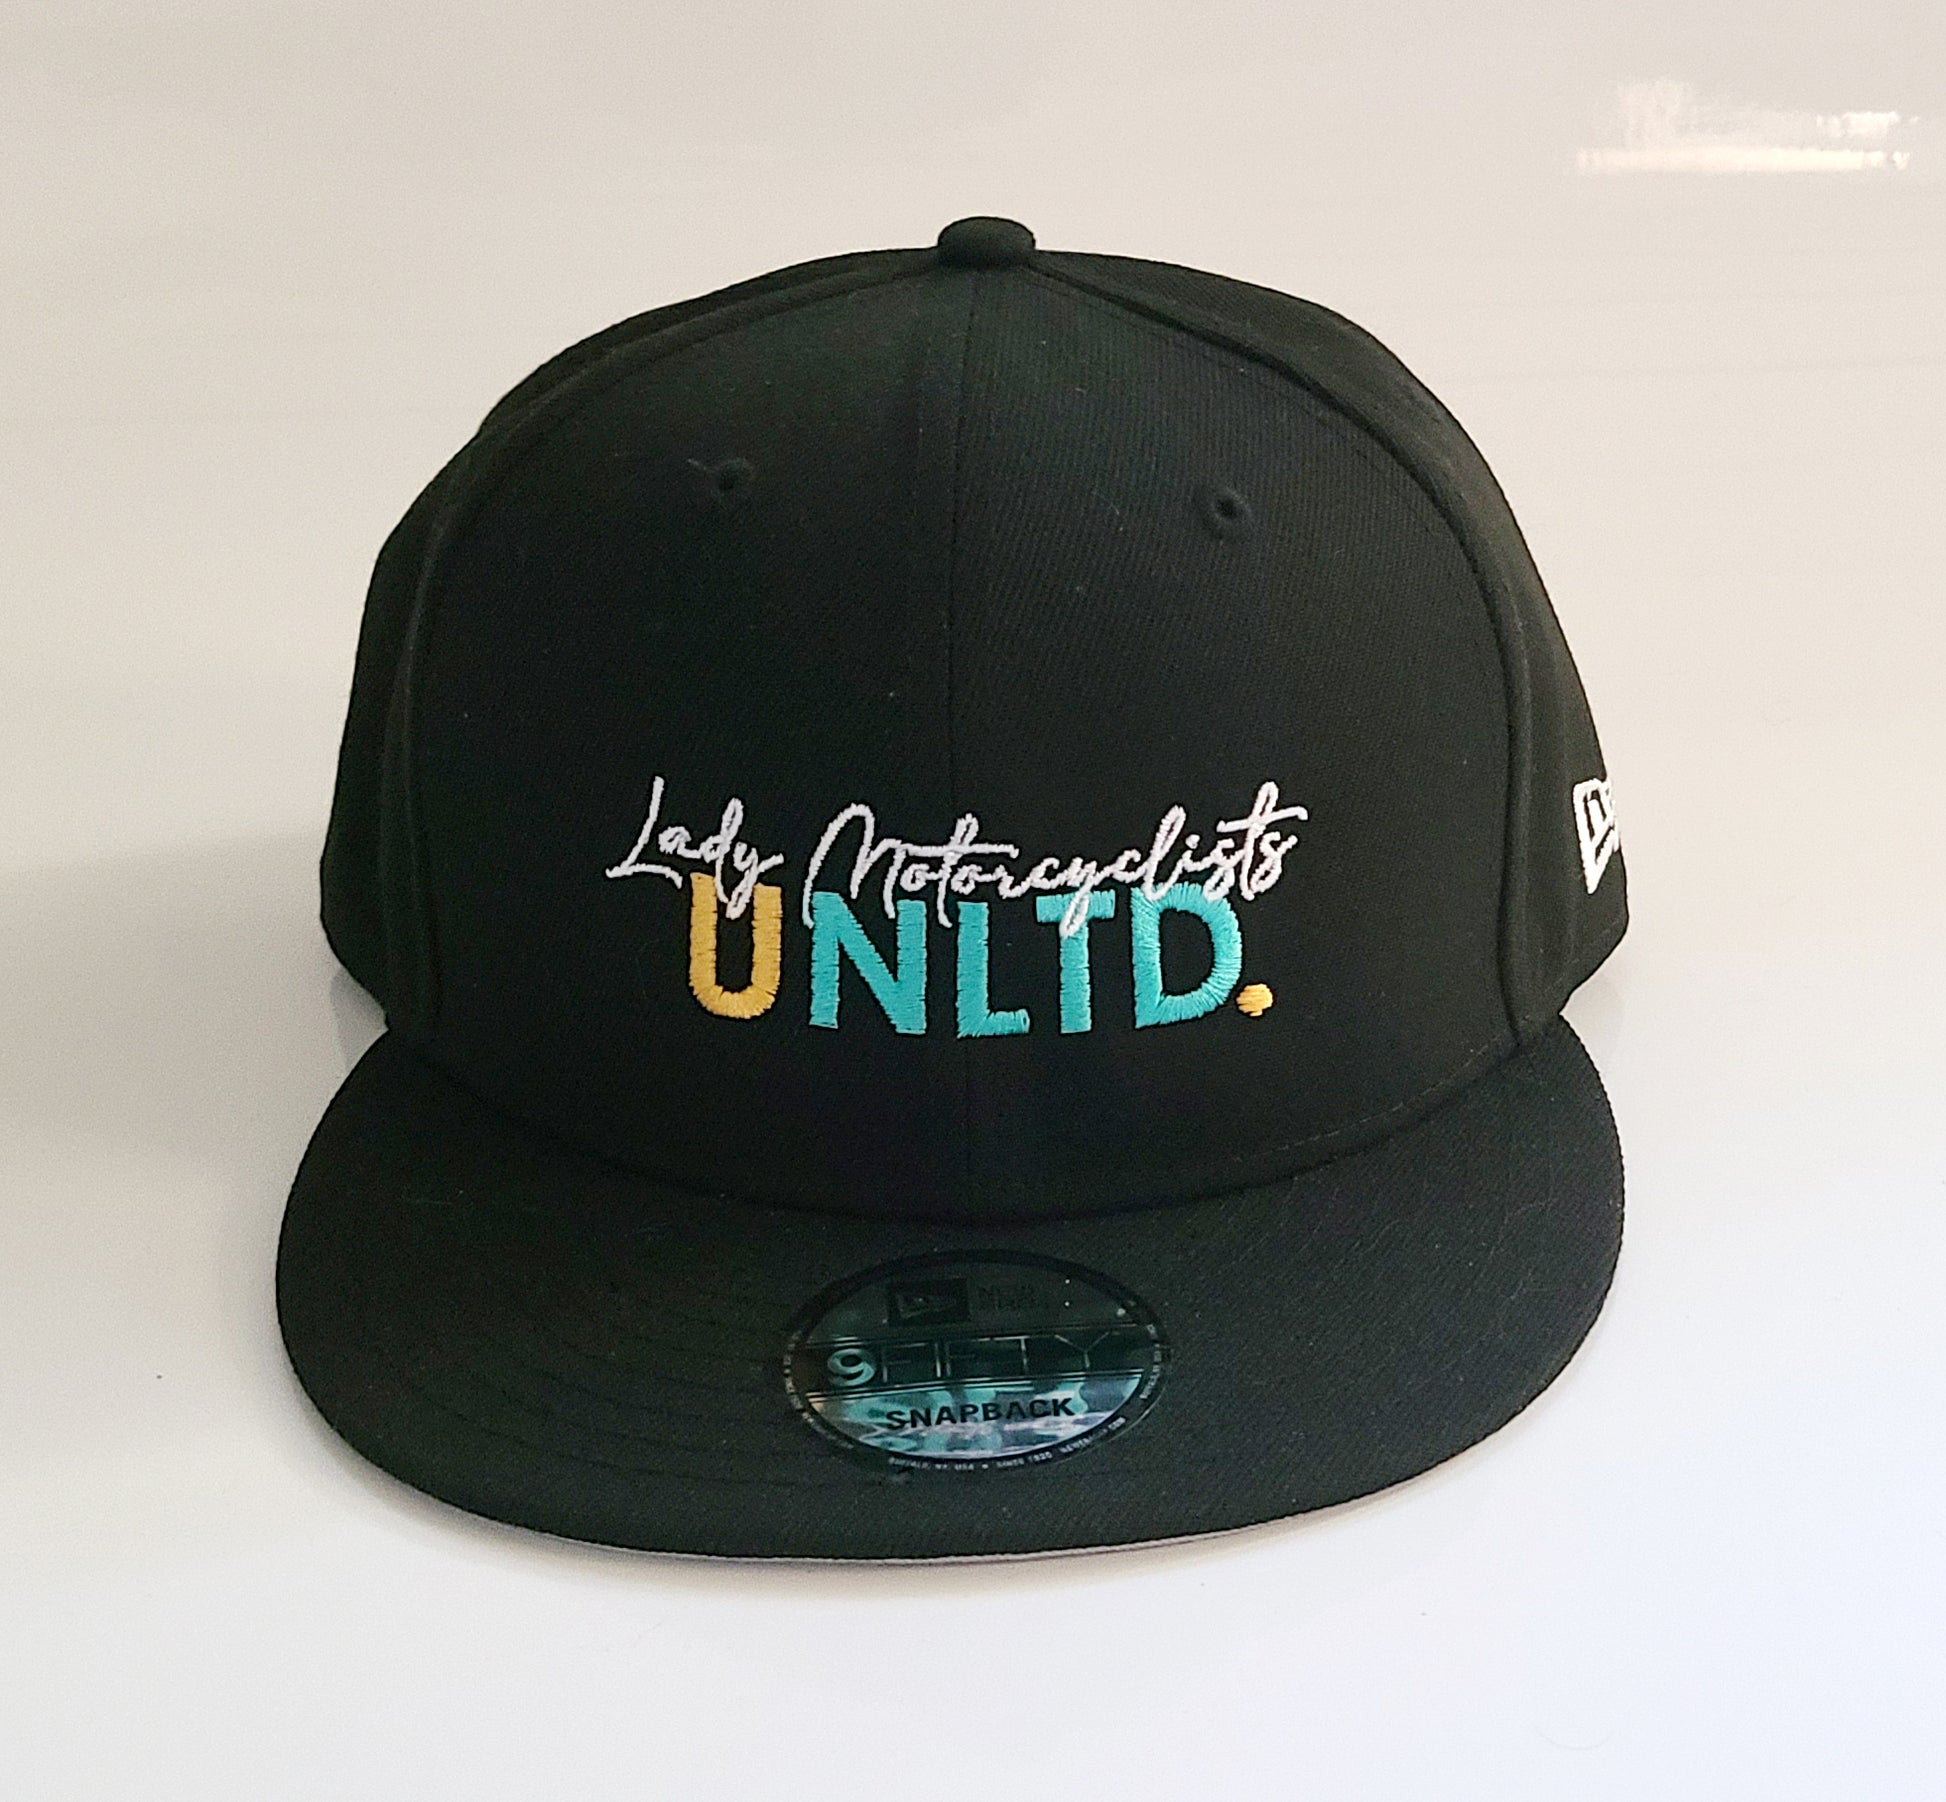 Embroidered Lady Motorcyclists Unlimited logo 9fifty authentic snapback cap